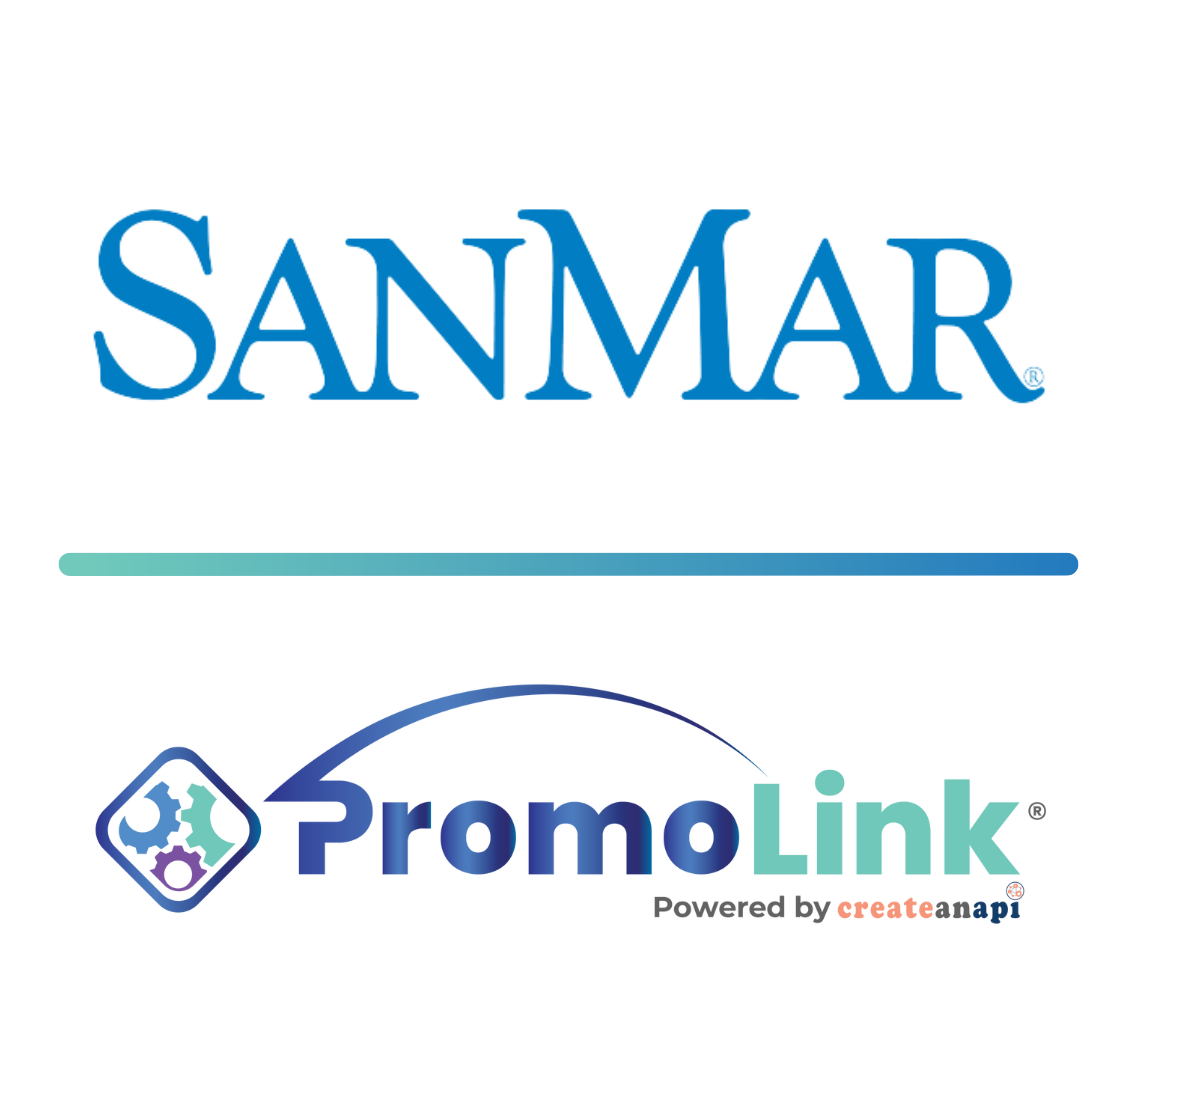 
Integrate your platform to Sanmar quickly, effectively, 
and seamlessly